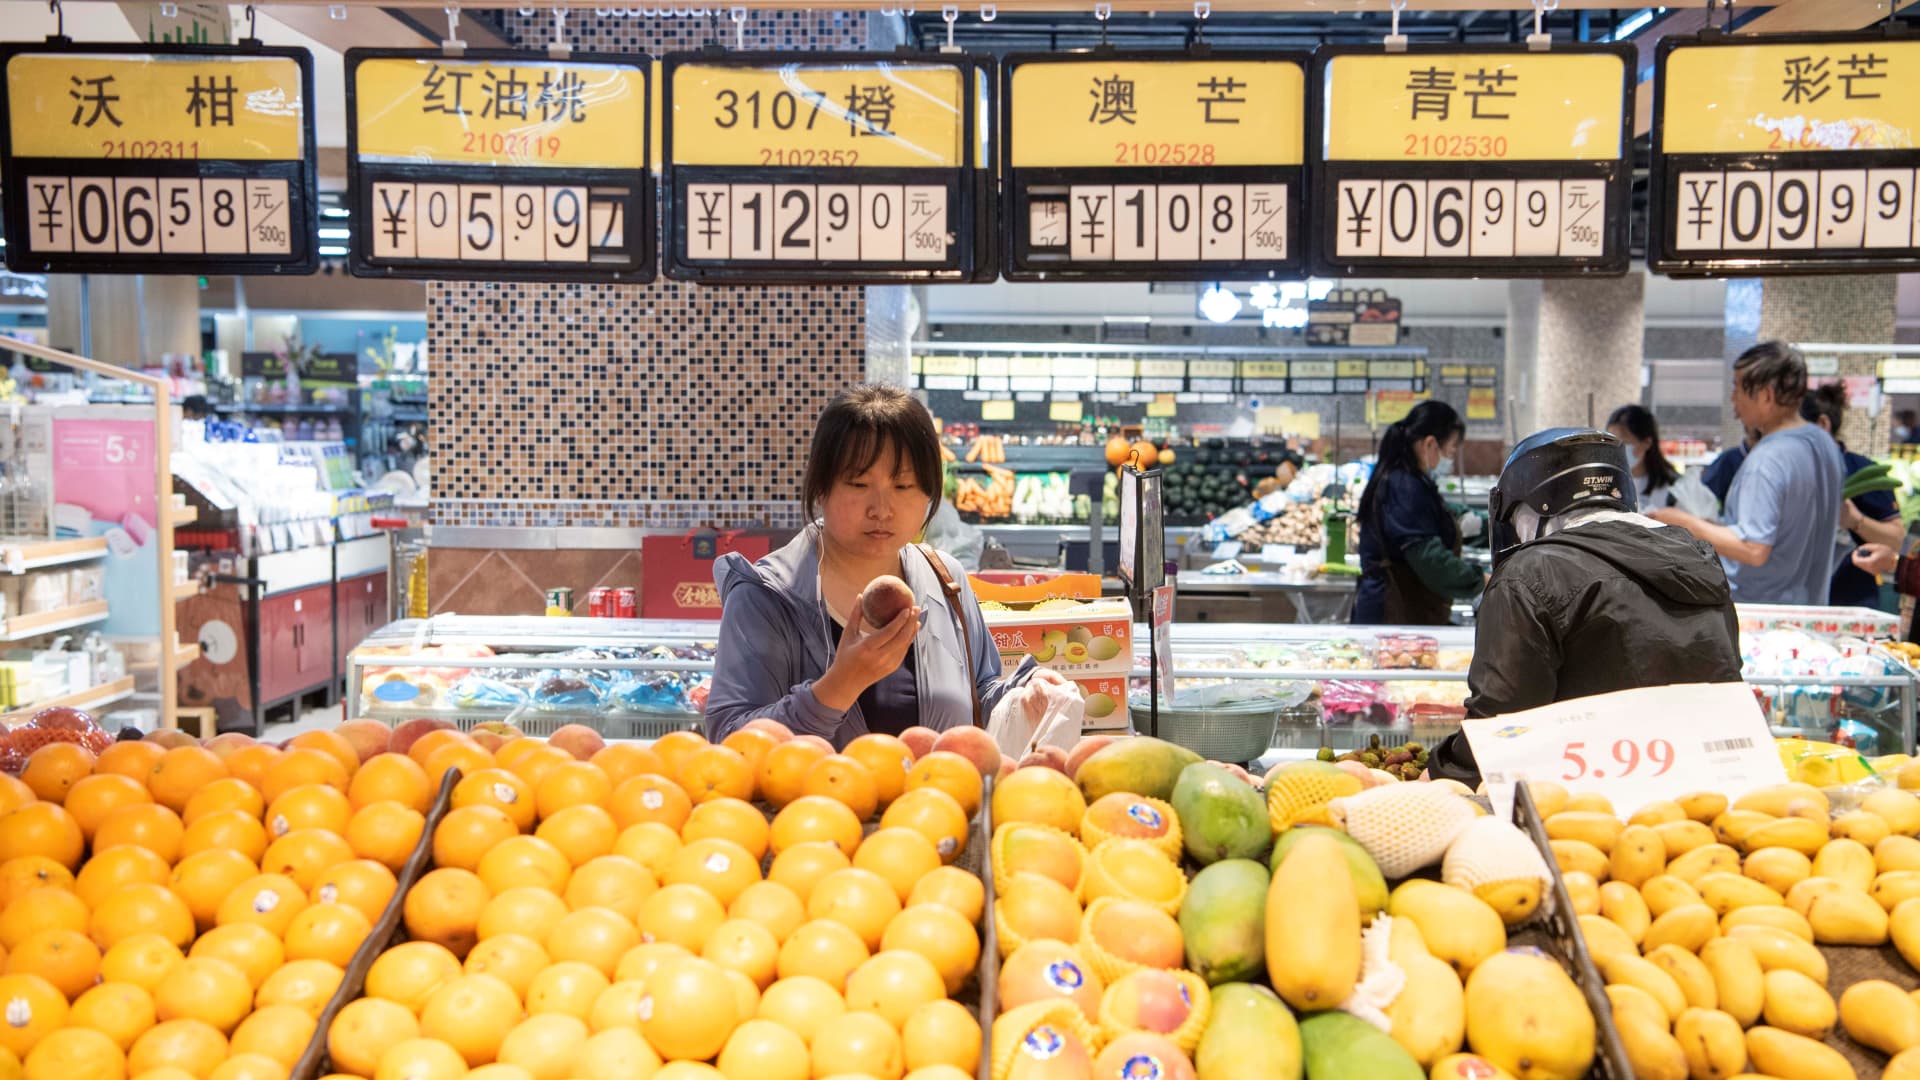 China's cautious consumer confidence is dampening economic recovery, says ADB  